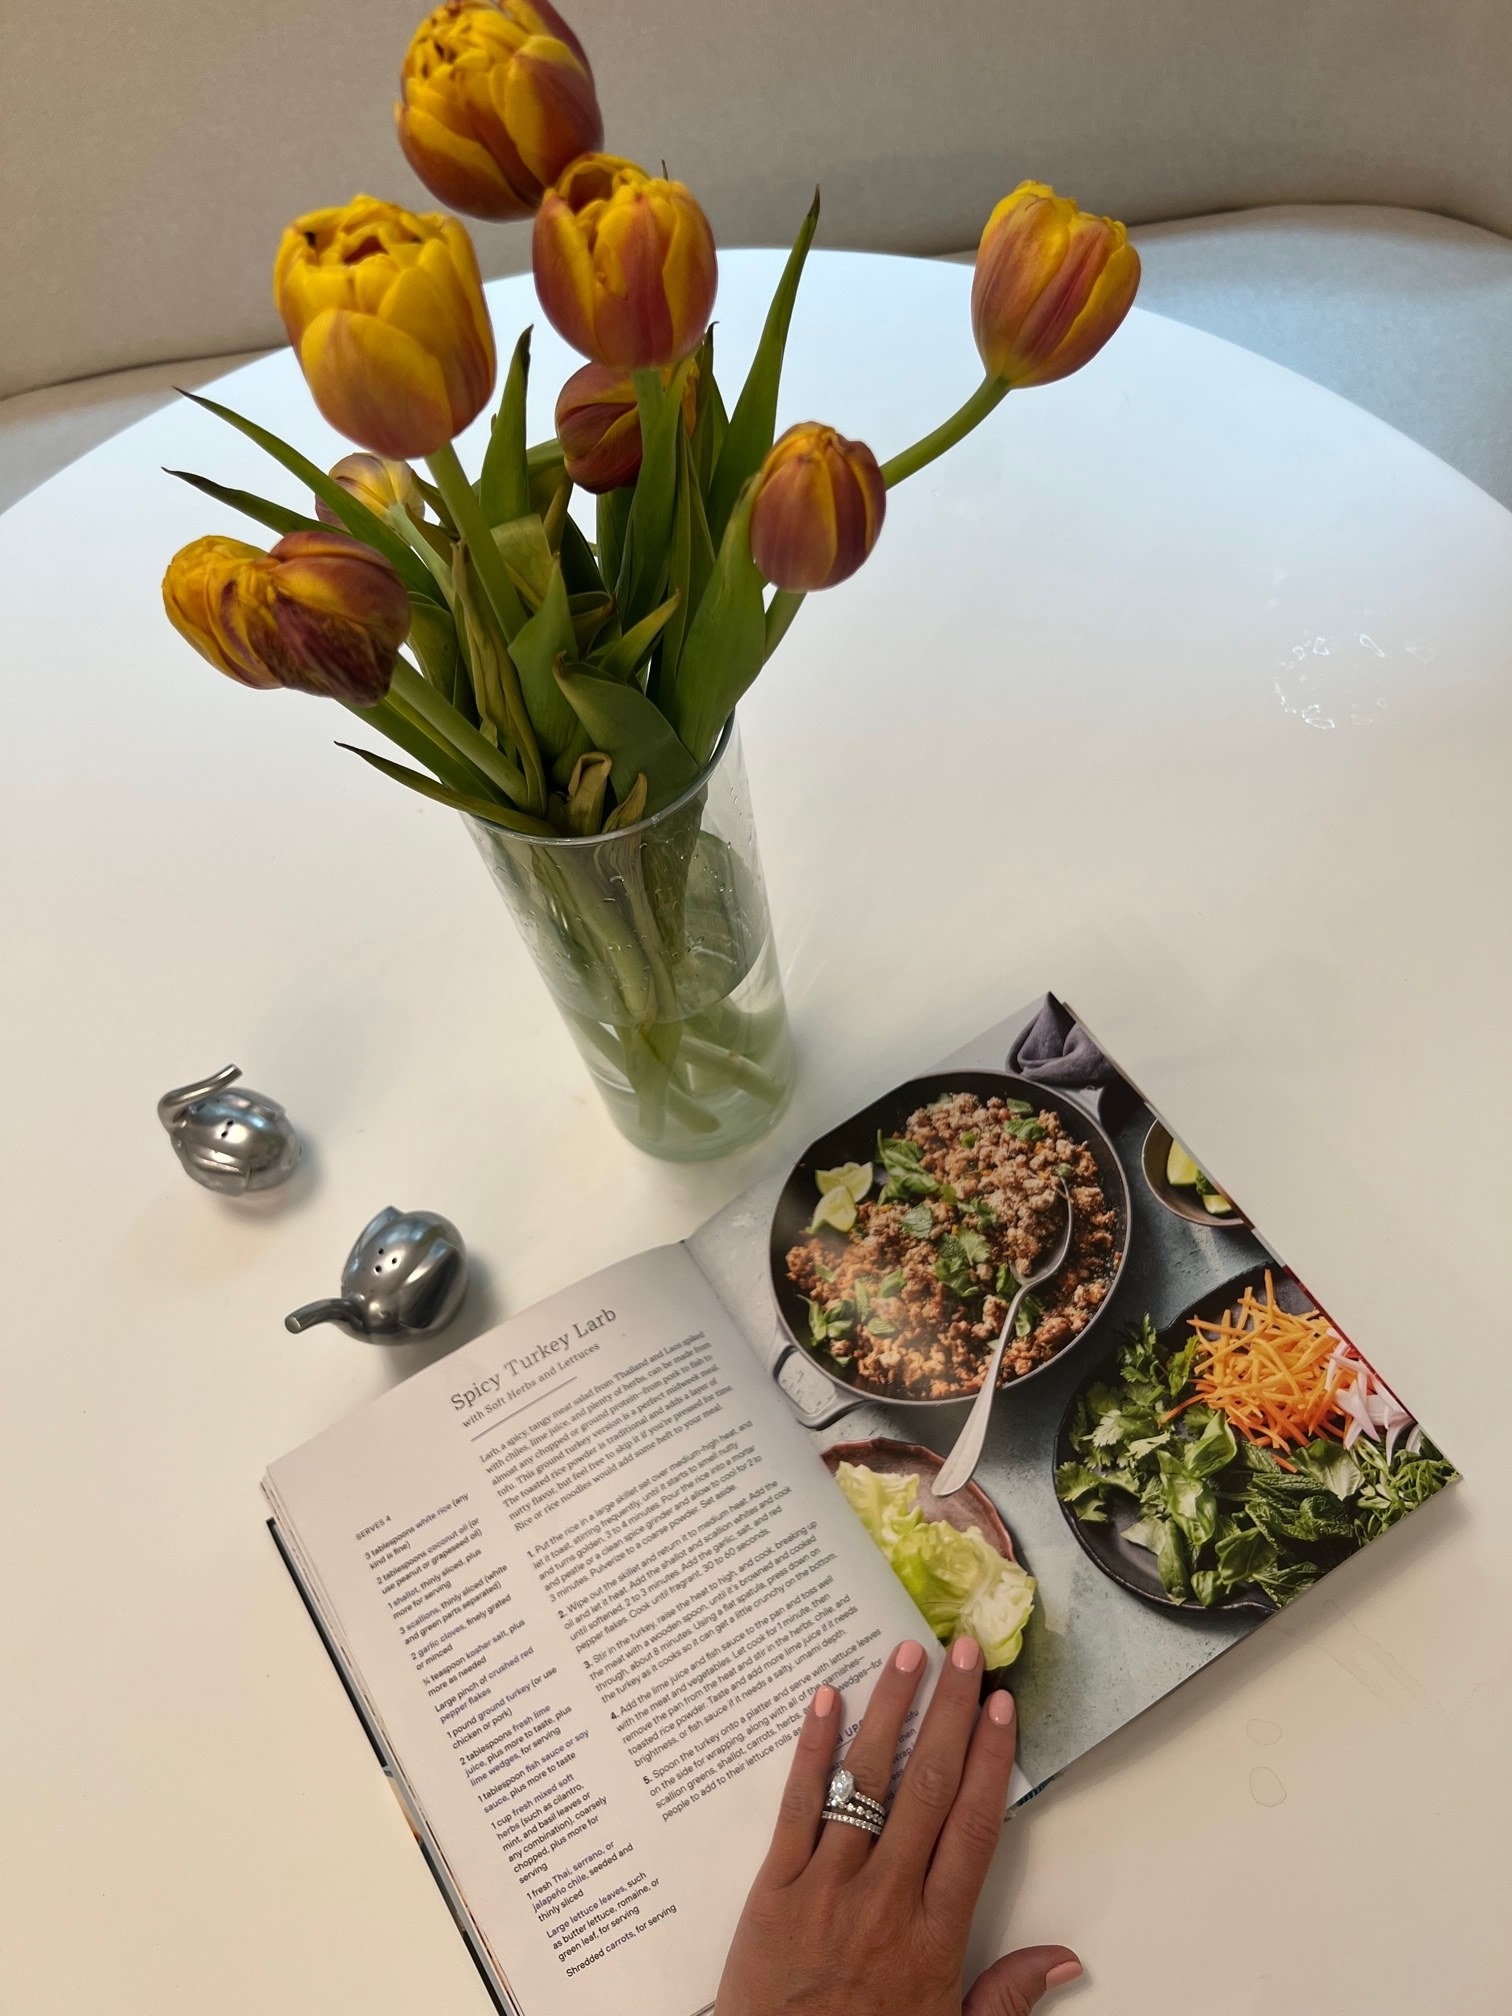 A cookbook open to a recipe for spicy turkey larb.